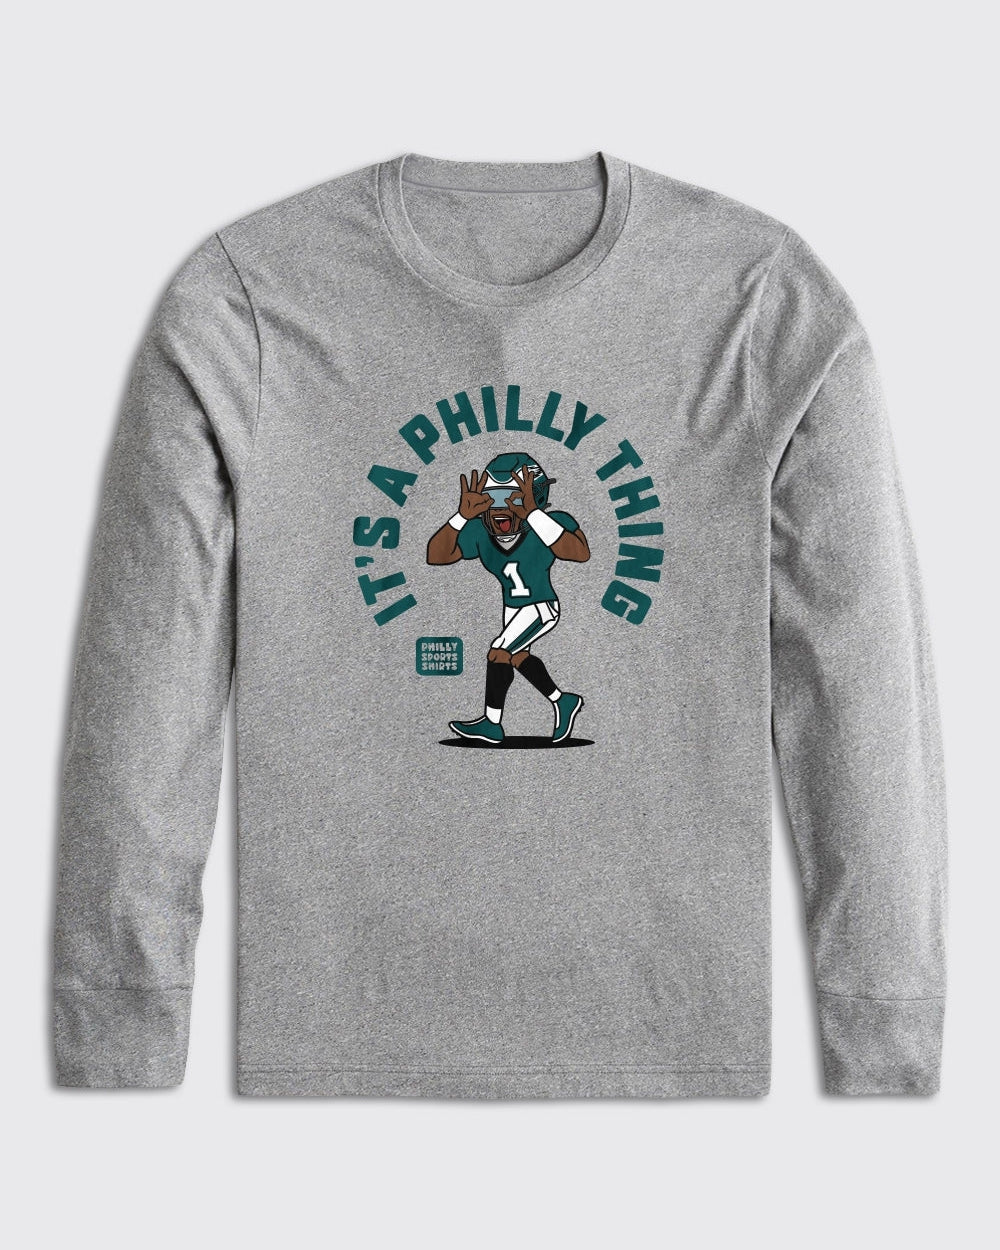 It's A Philly Thing Long Sleeve - Eagles, Long Sleeve - Philly Sports Shirts